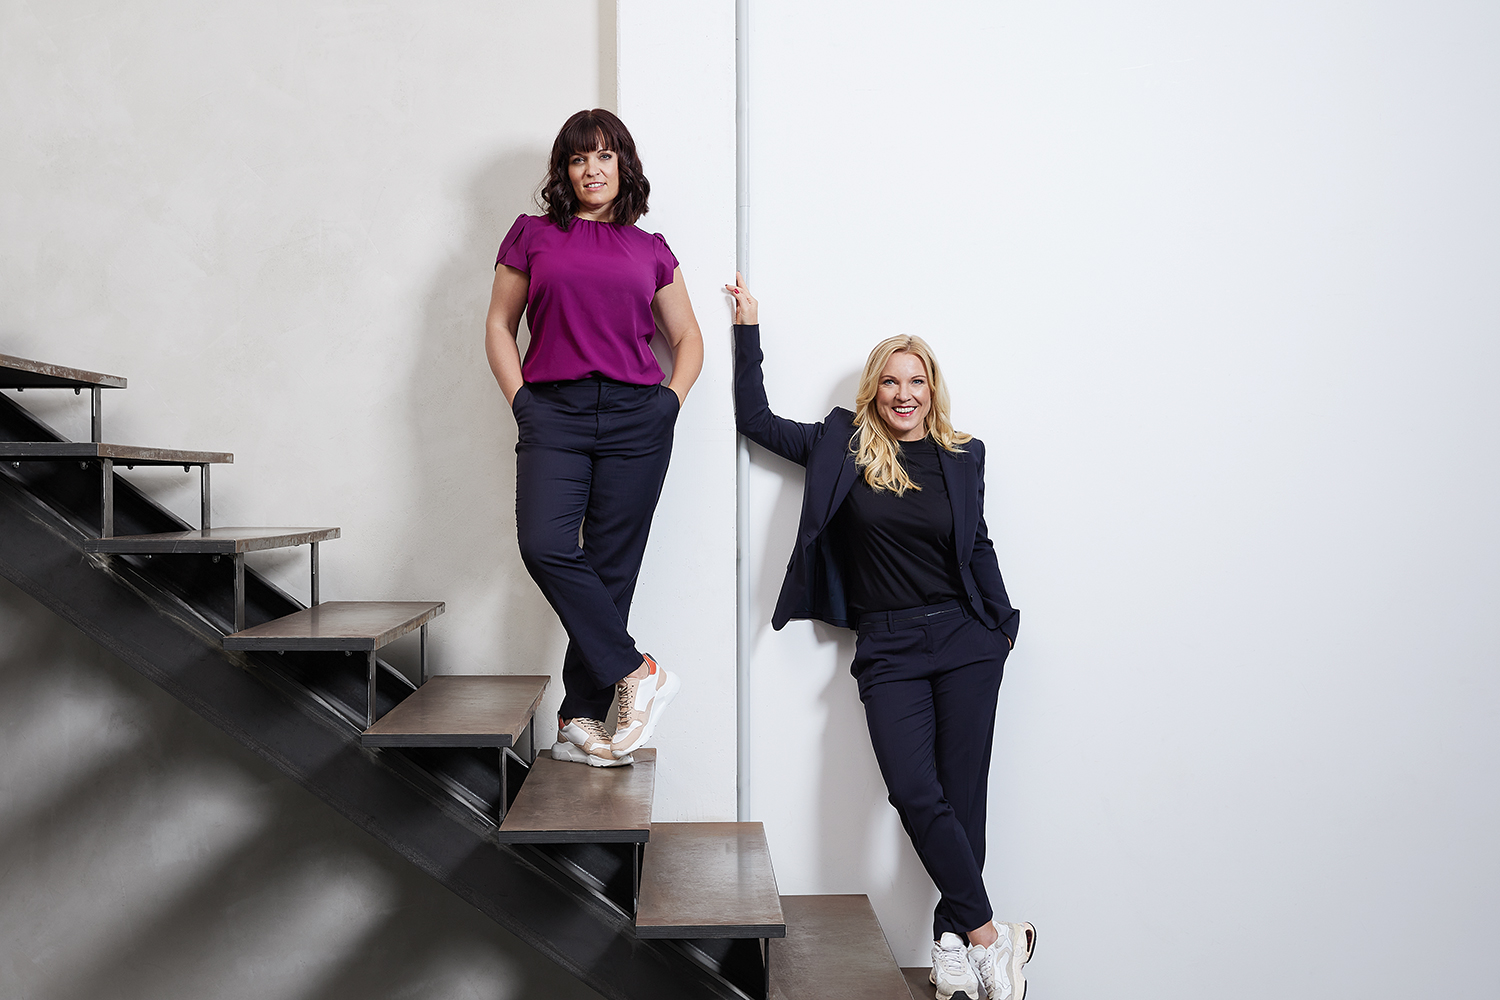 conny hoerl and katja ruhnke post on a modern staircase in front of a white wall at ck workspace unterschleissheim